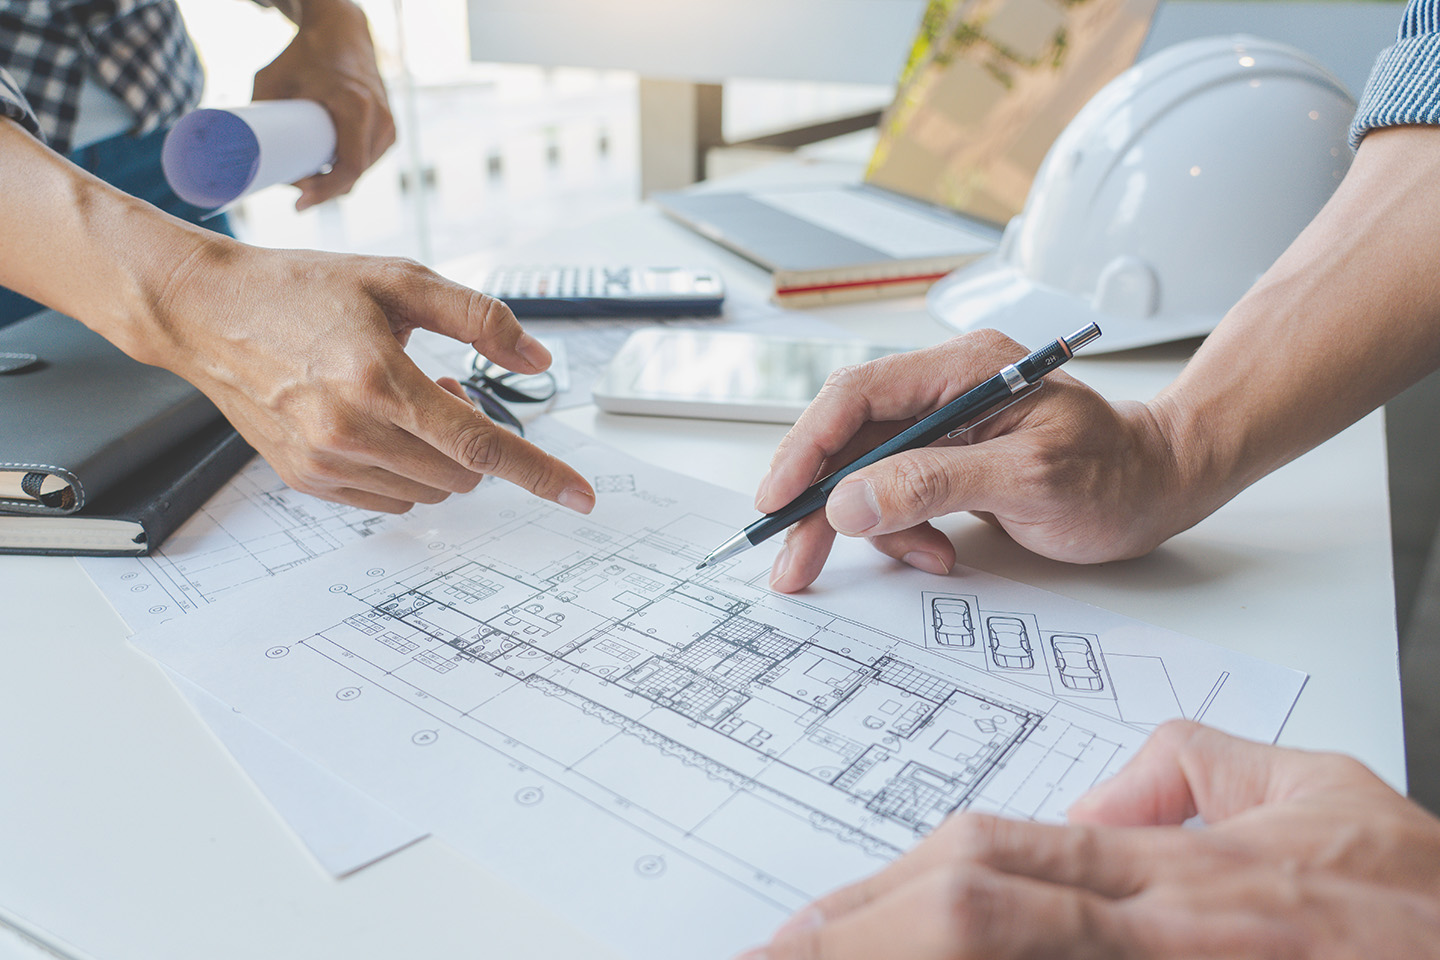 engineer Hand Drawing Plan On Blue Print with architect equipment discussing the floor plans over blueprint architectural plans at table in a modern office